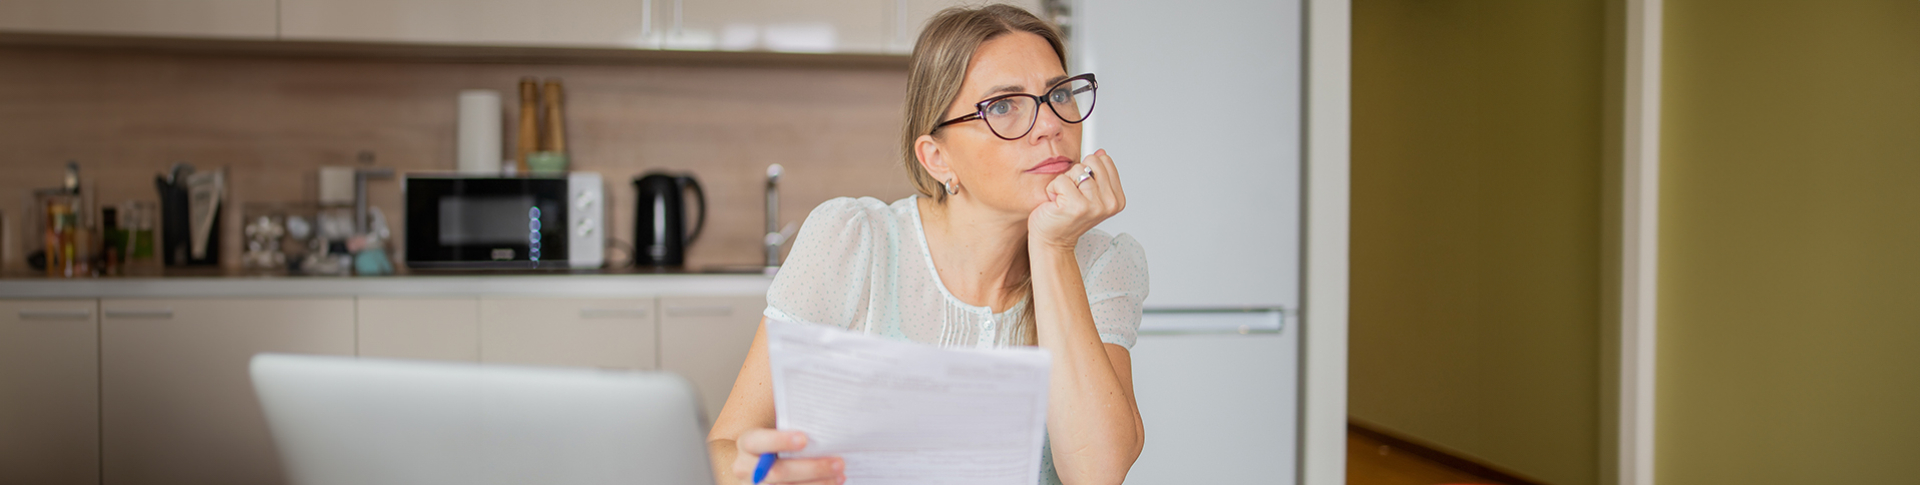 Woman thinking about her bad credit